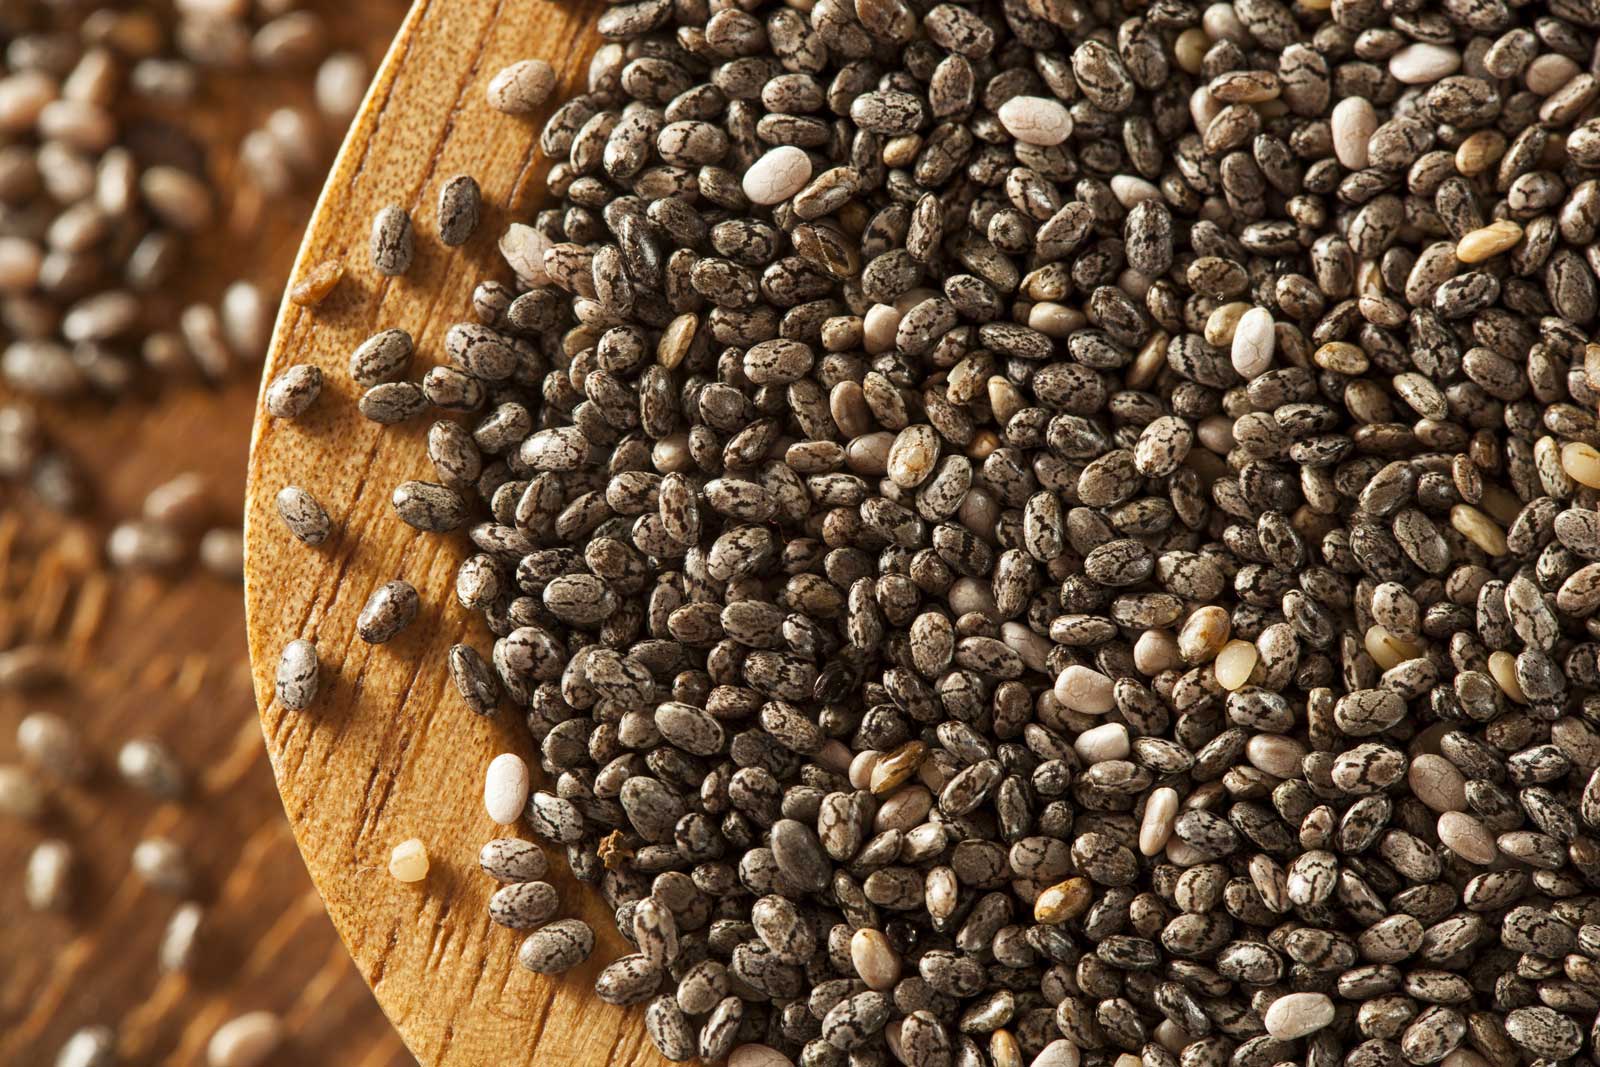 Organic Dry Black and White Chia Seeds against a background